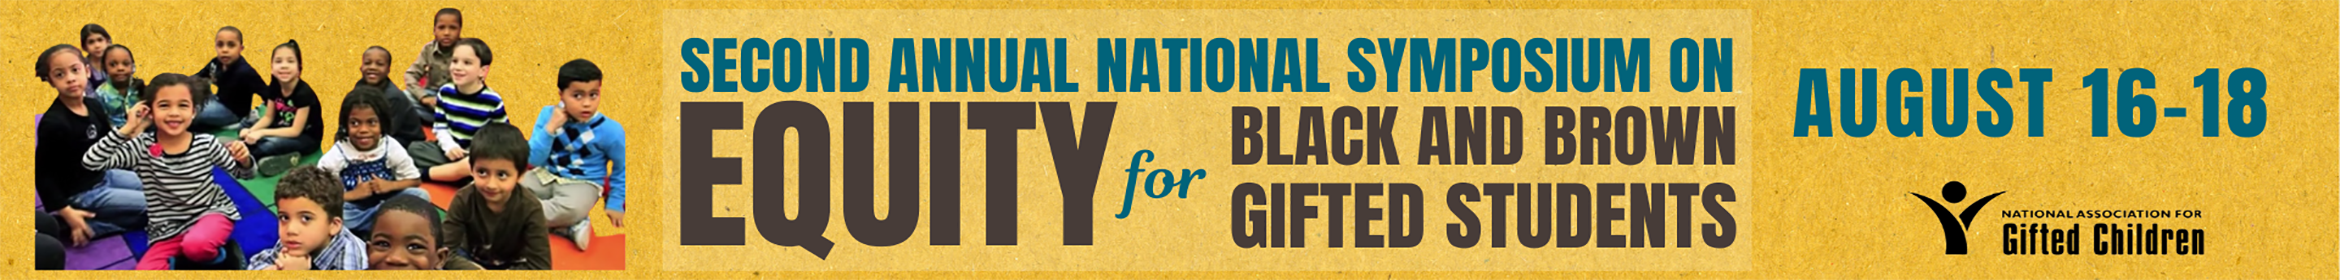 2022 National Symposium on Equity for Black and Brown Gifted Students Main banner